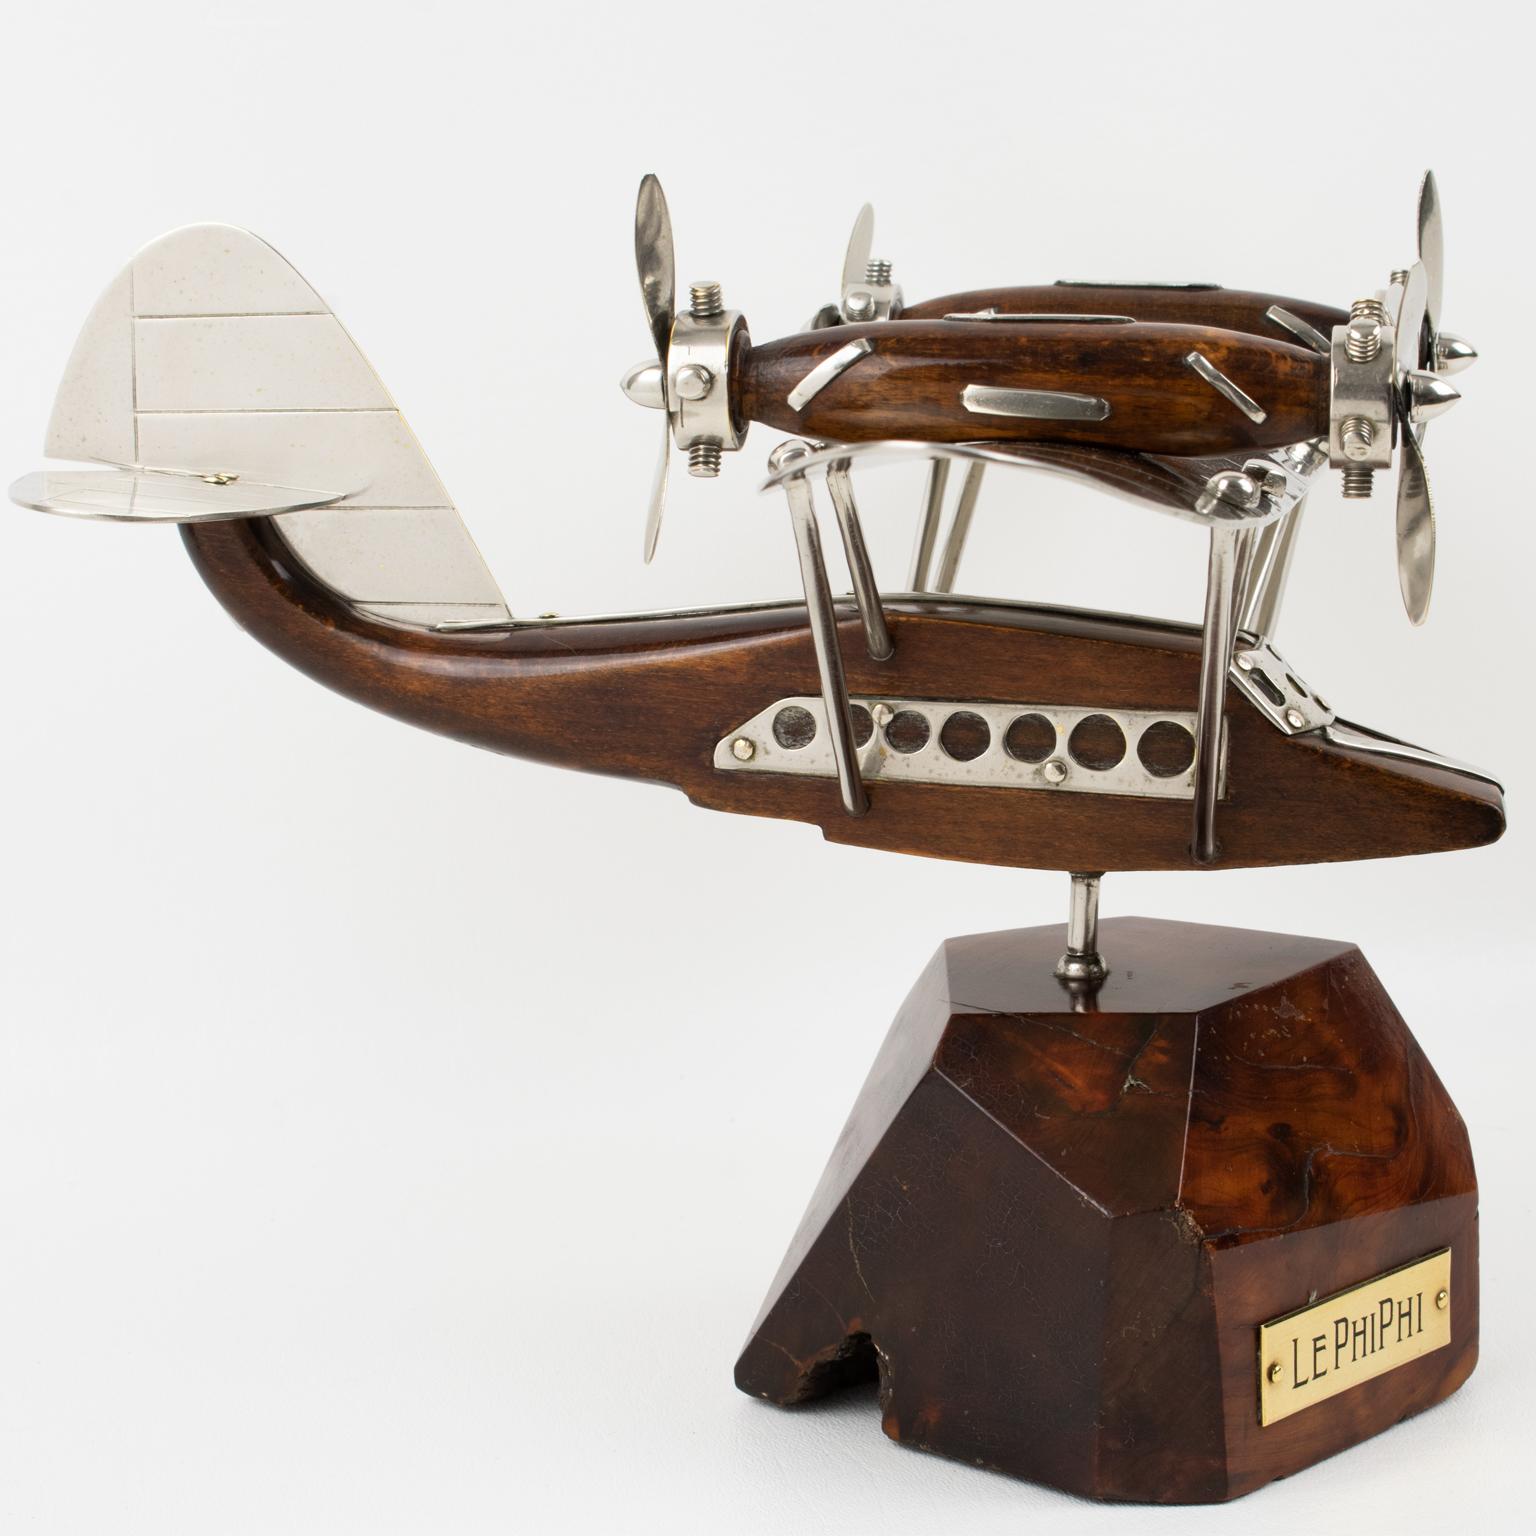 French Art Deco Wood and Chrome Airplane SeaPlane Aviation Model, France 1940s For Sale